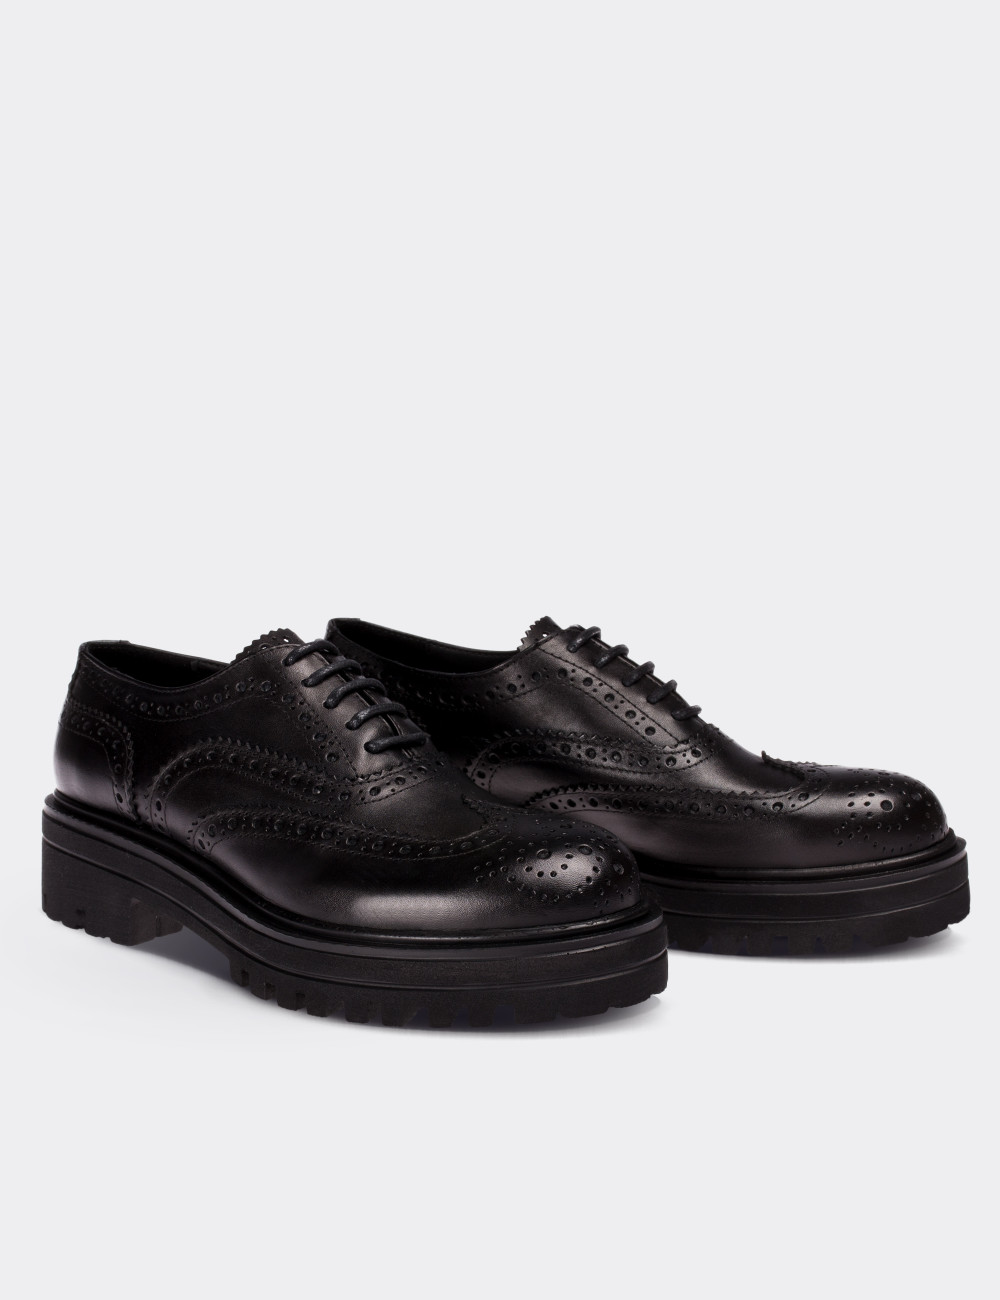 Black Leather Lace-up Shoes